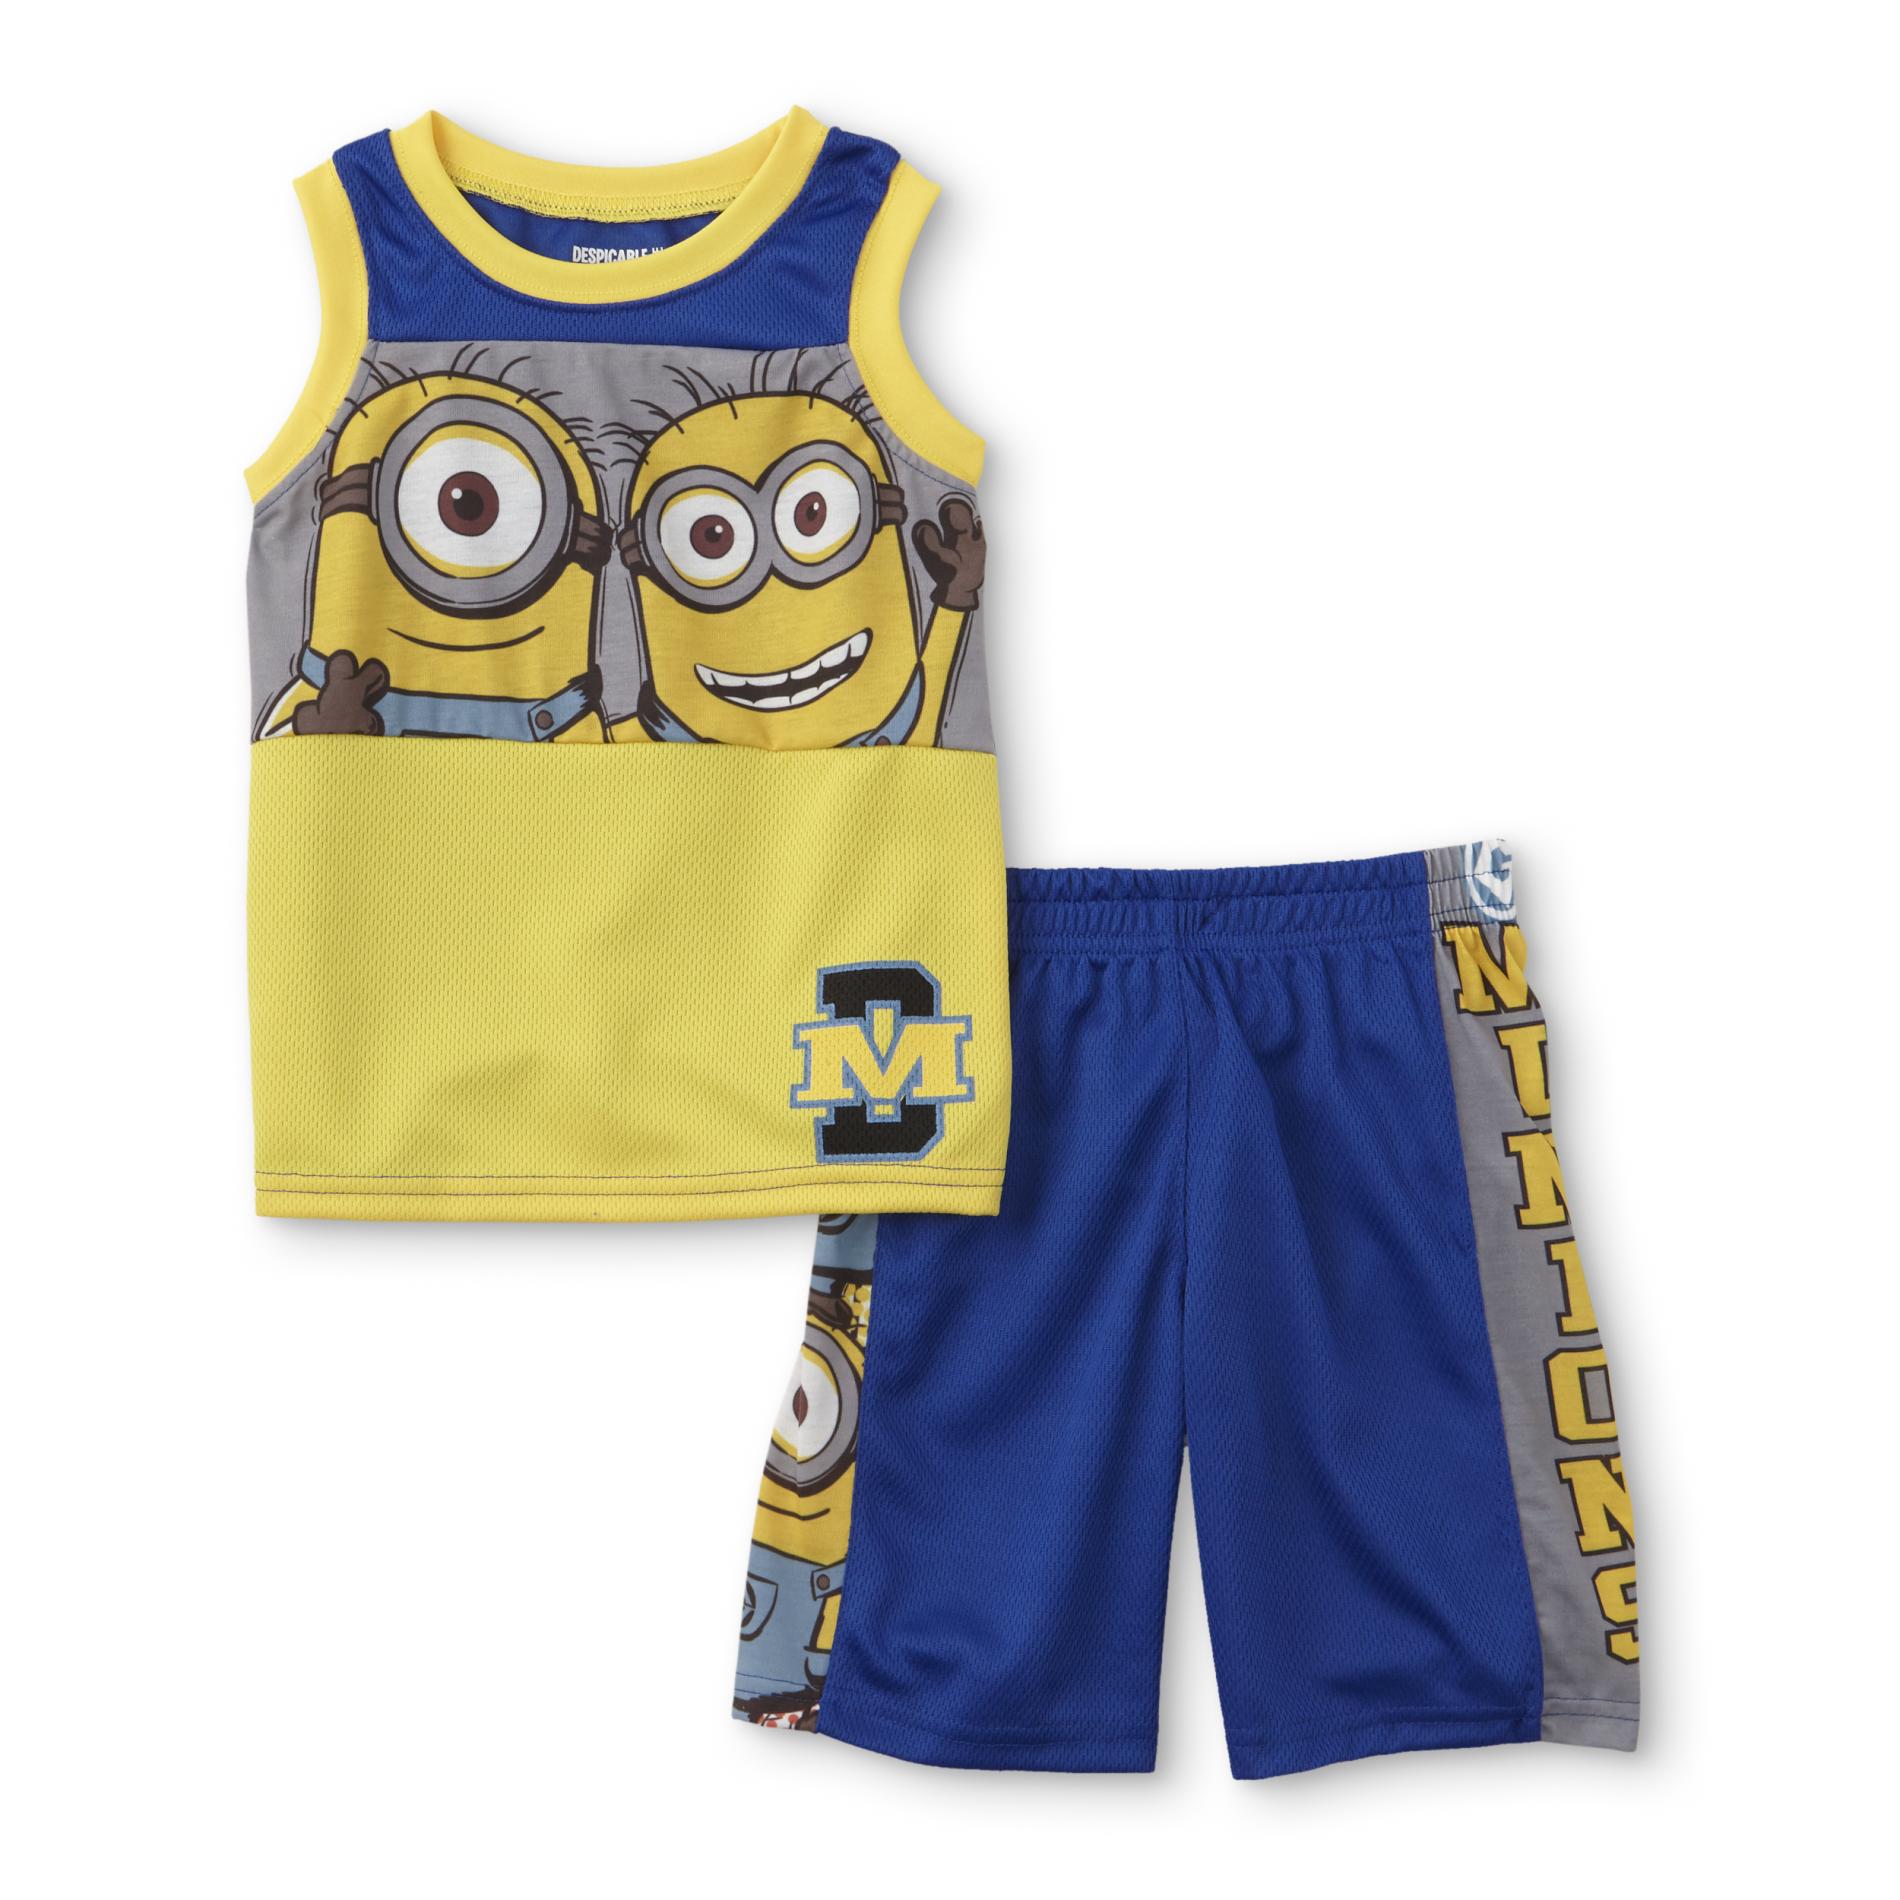 UNIVERSAL PICTURES Despicable Me Toddler Boys' Graphic T-Shirt & Shorts